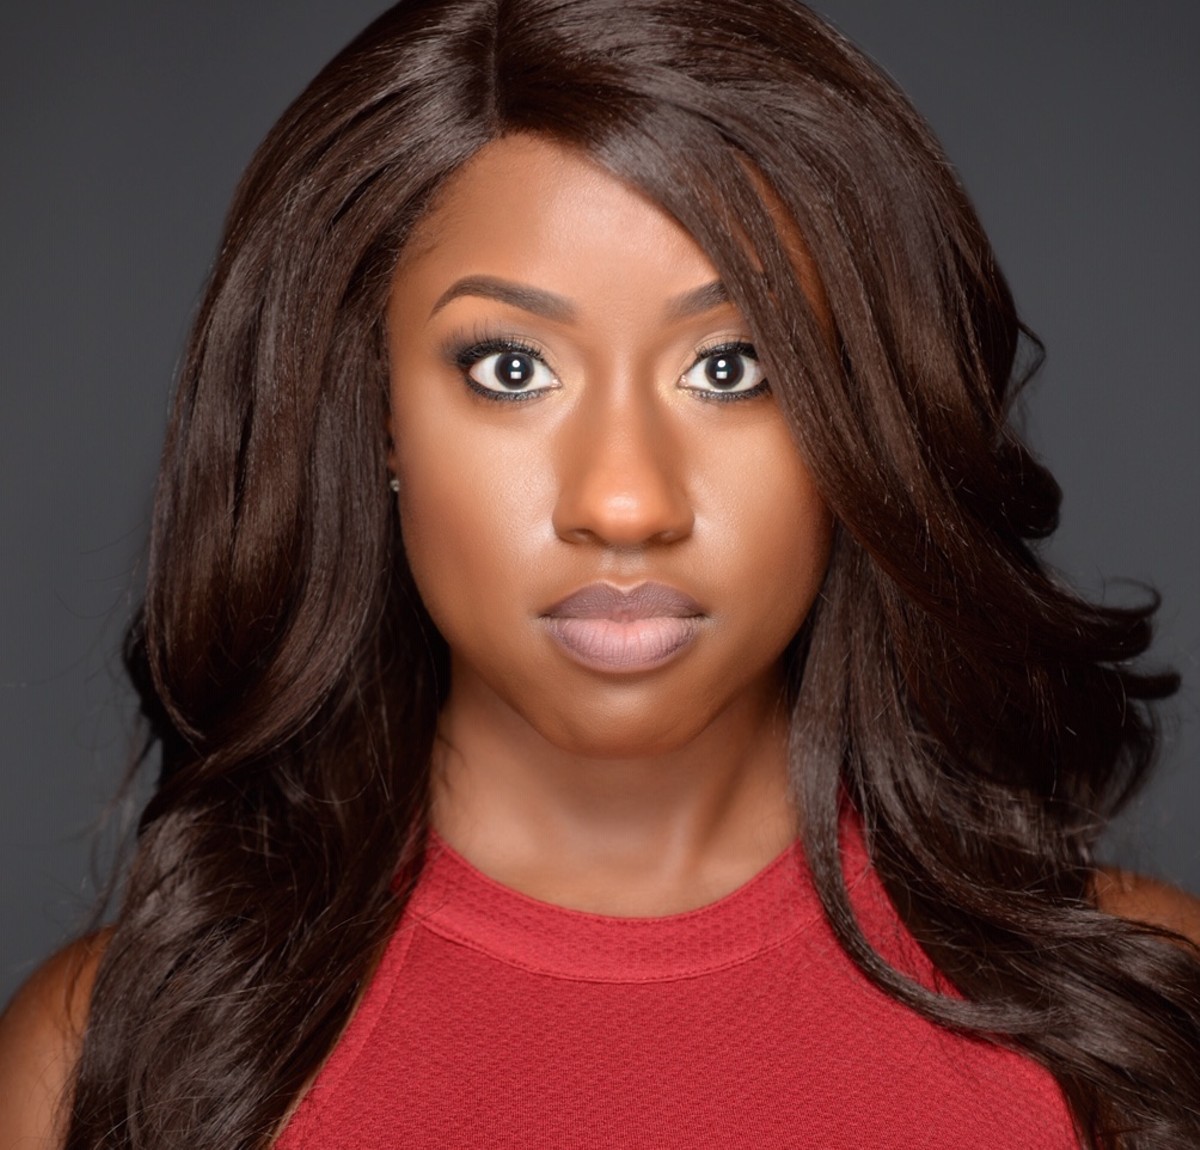 Orlando singer Meka King discusses the Broadway Advocacy Coalition’s #BwayForBLM initiative